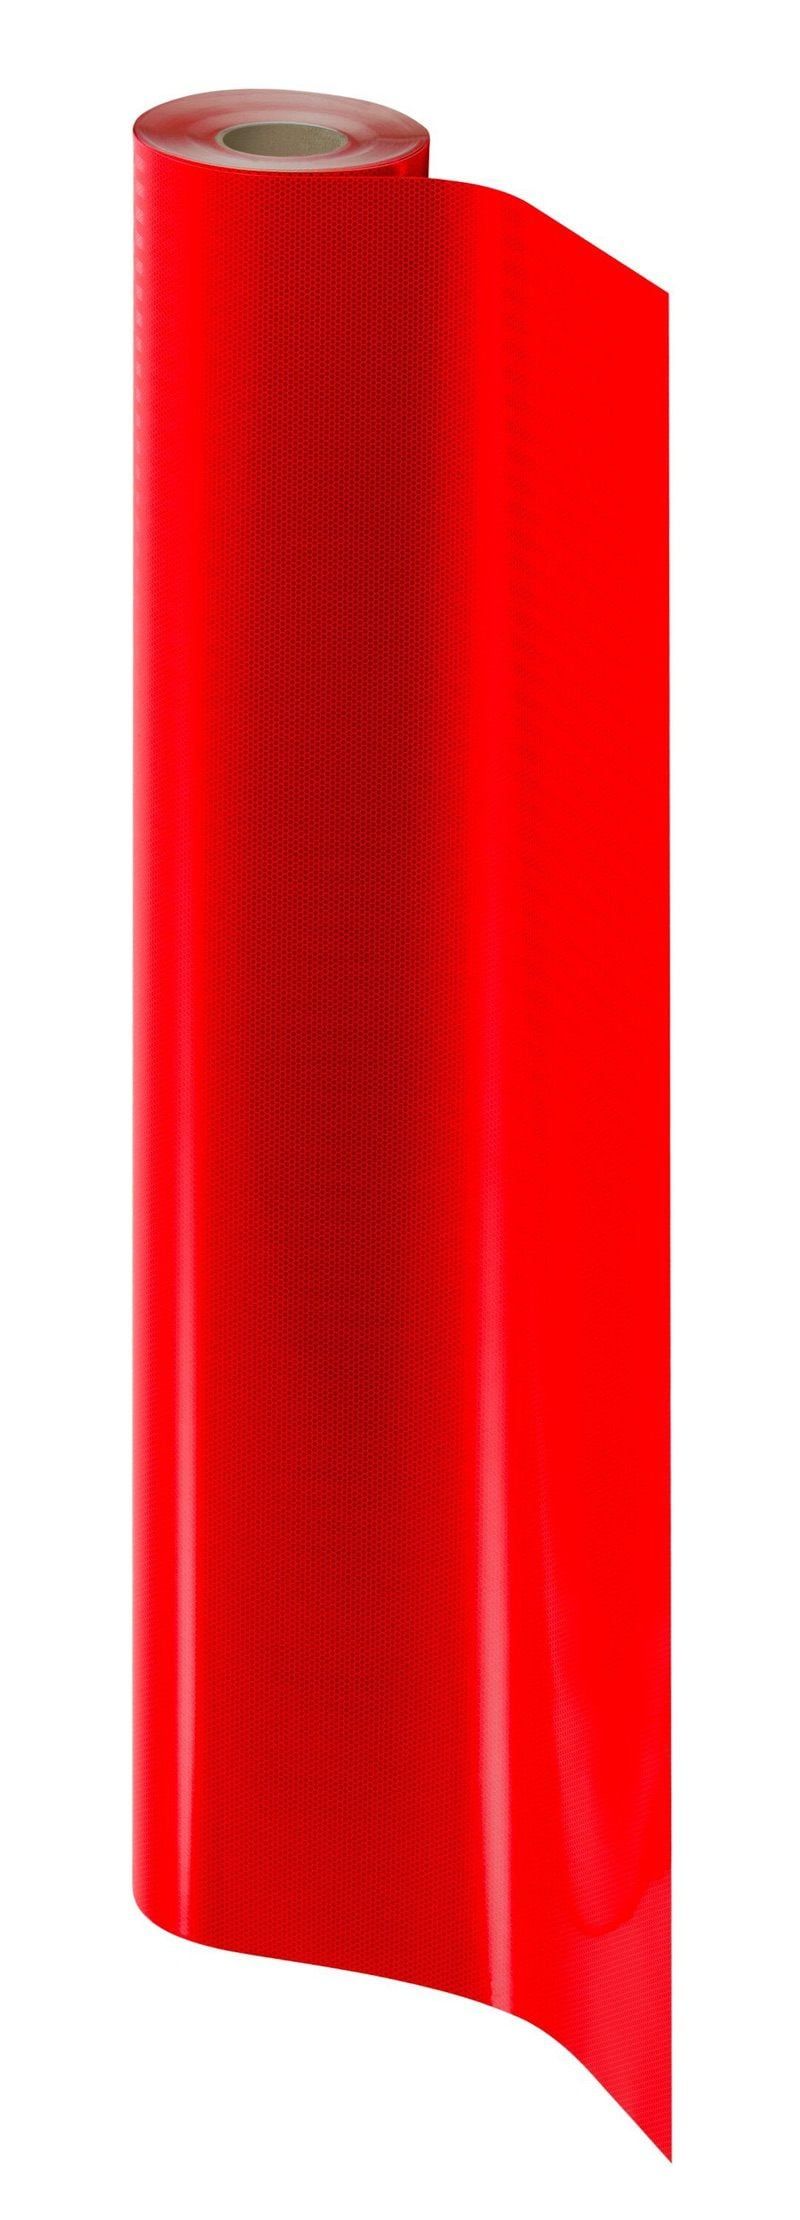 3M™ High Intensity Metalized Flexible Prismatic Vehicle Marking 823i-12, Red, 1220 mm x 45.7 m